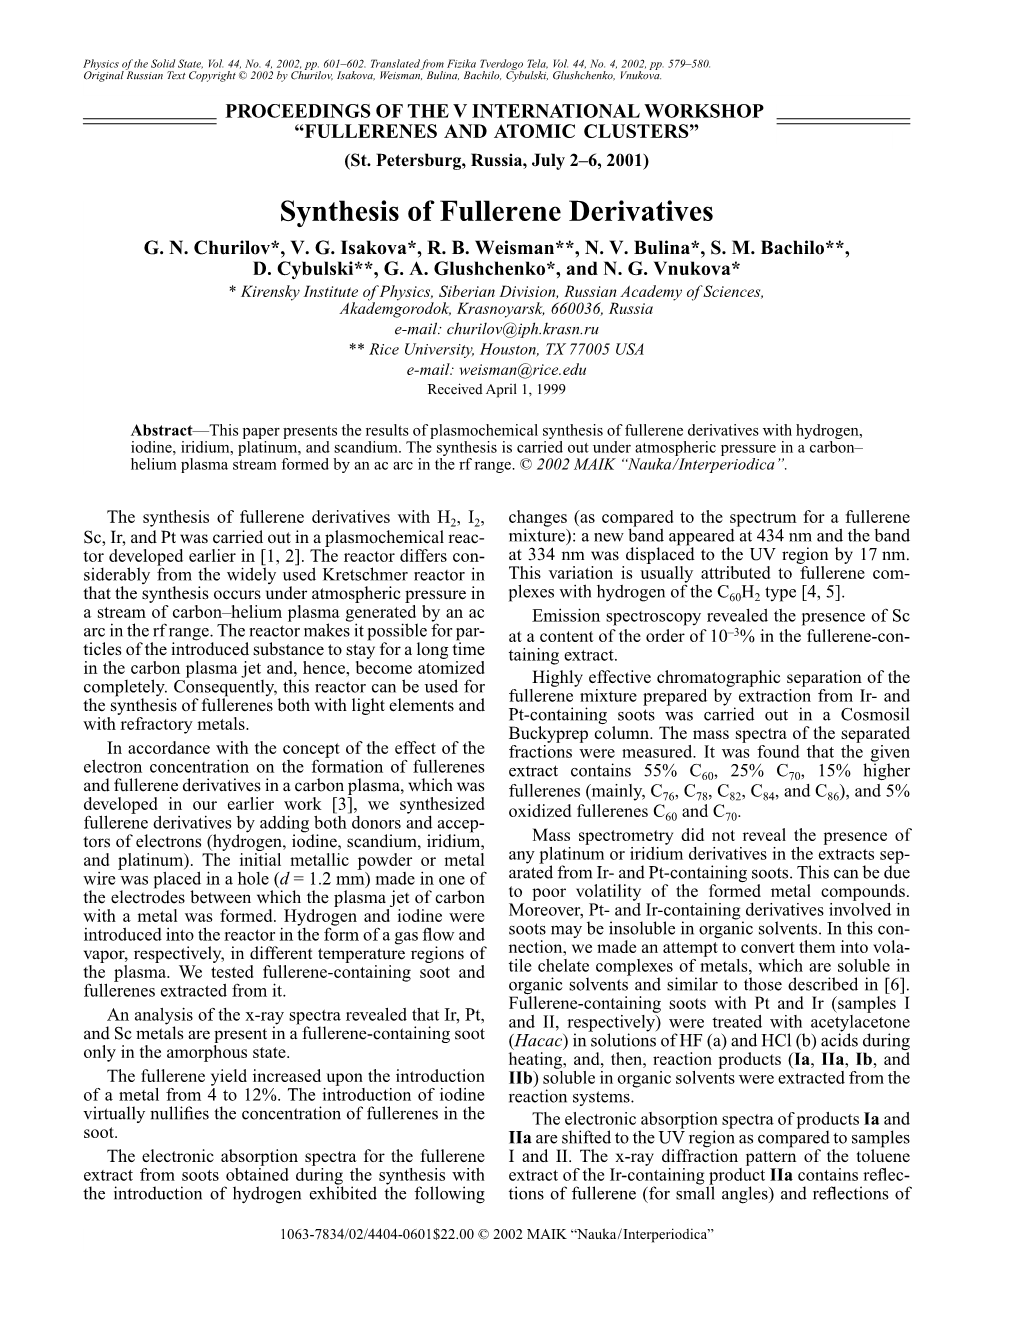 Synthesis of Fullerene Derivatives G